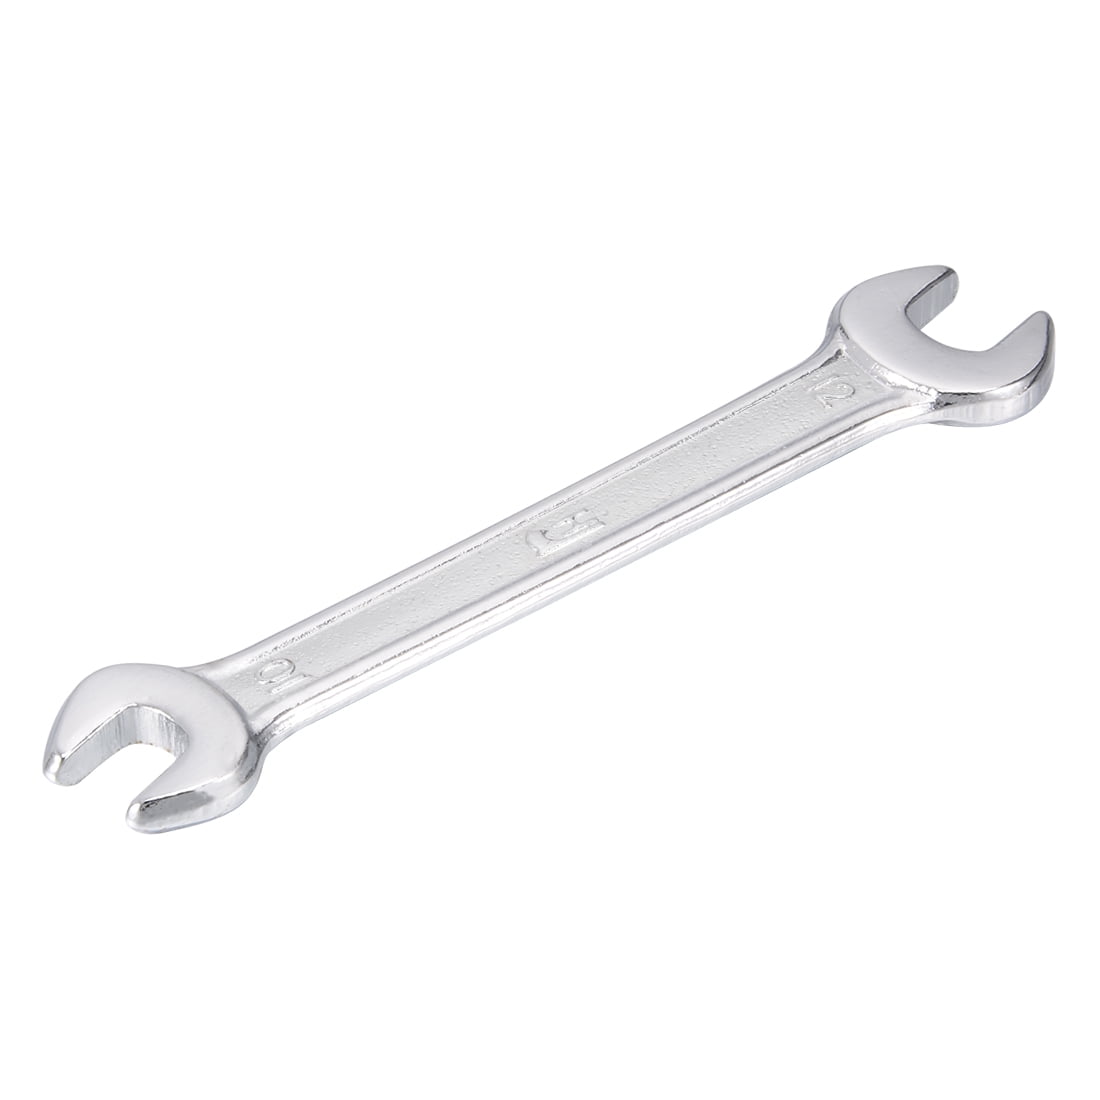 14mm x 15mm Short Deep Offset Forged Box End Wrench 